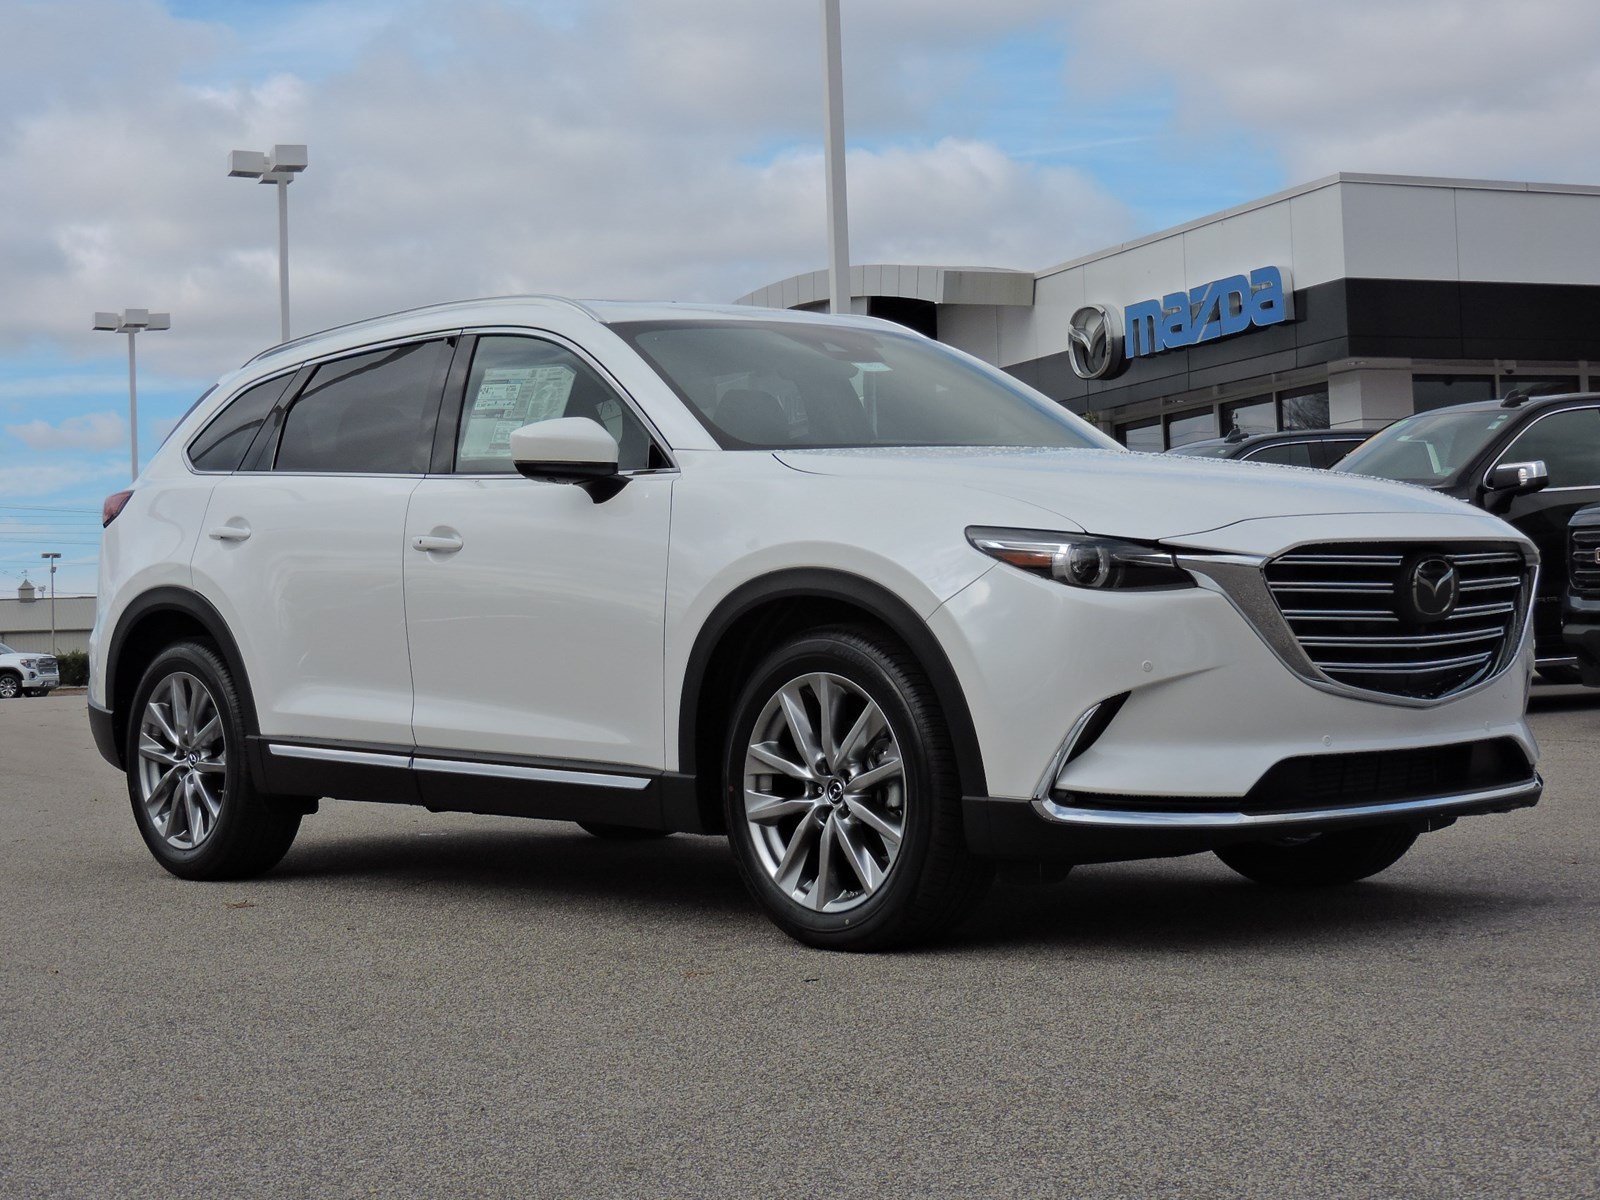 New 2019 Mazda Cx 9 Grand Touring With Navigation